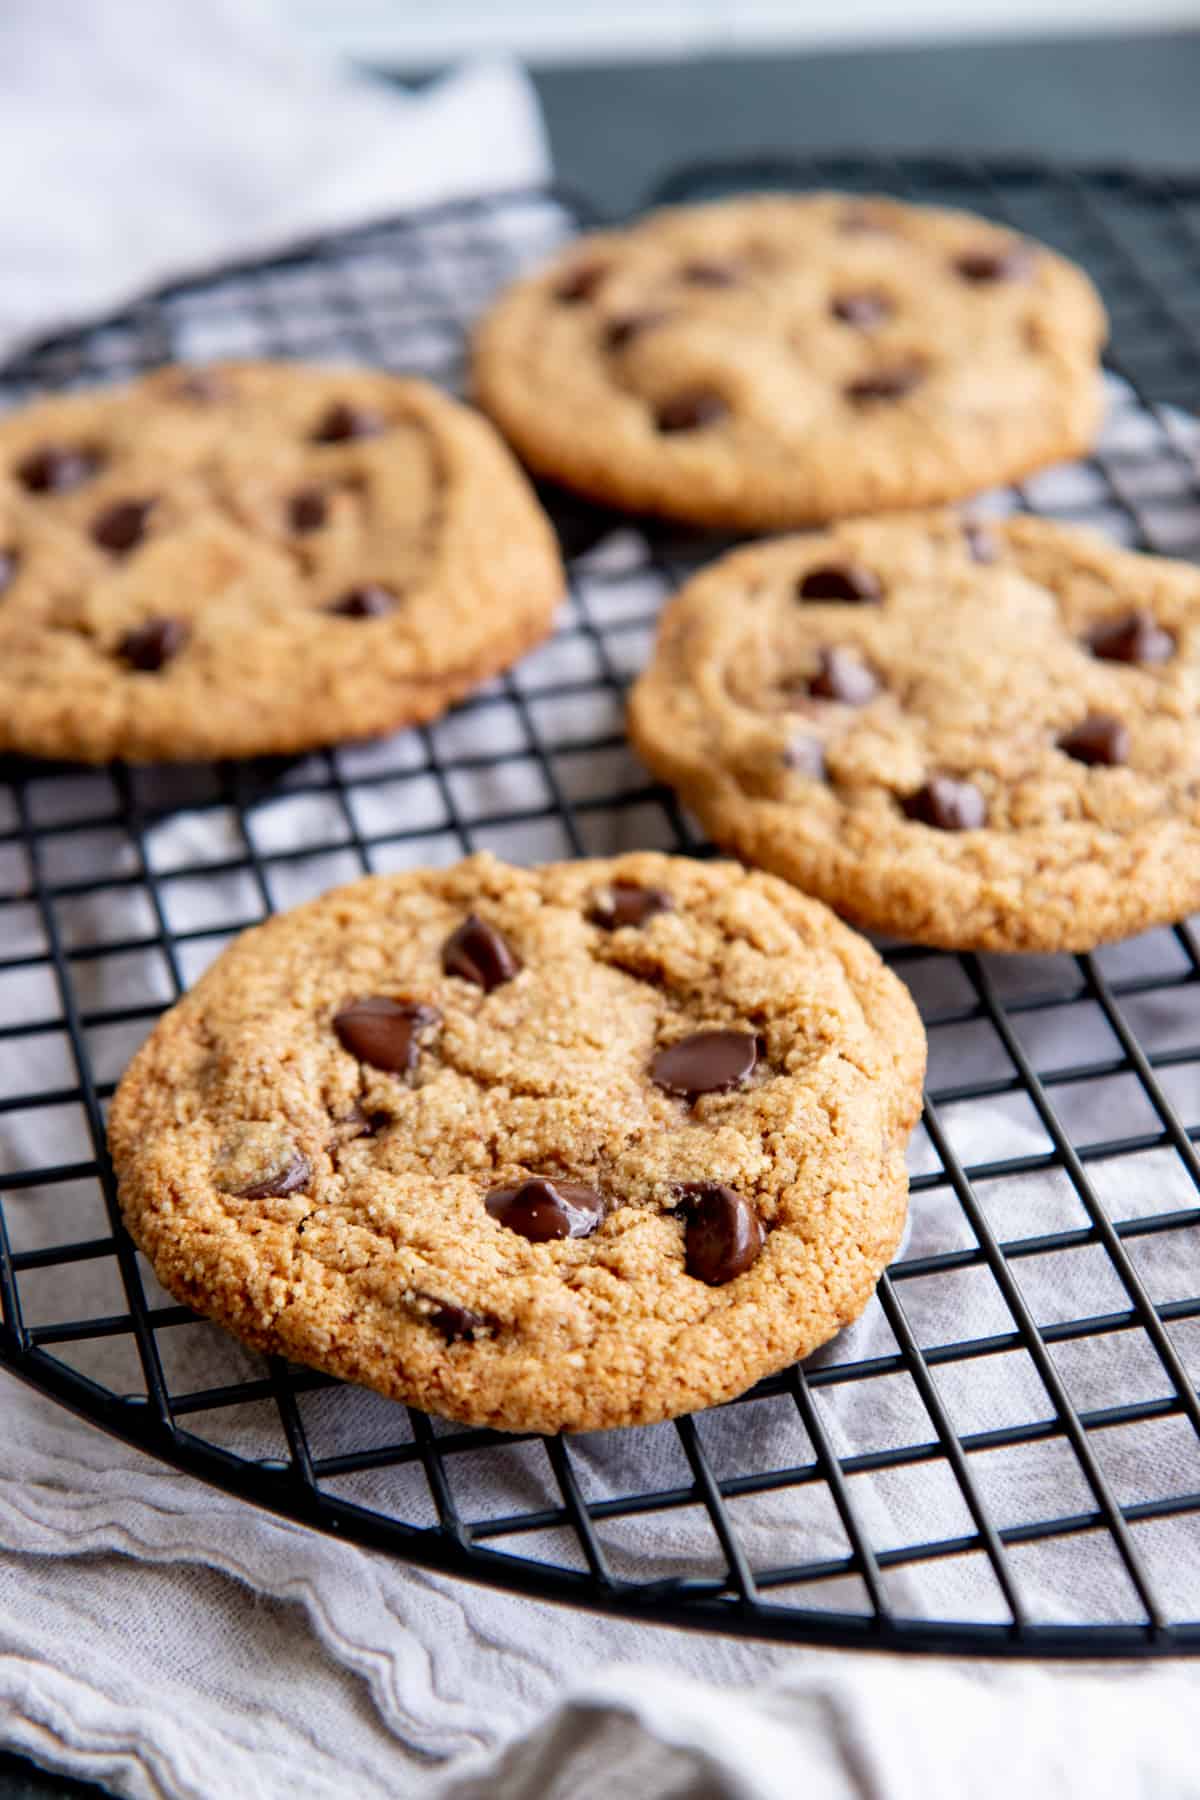 Almond flour chocolate chip cookies cool on a wire baking rack.